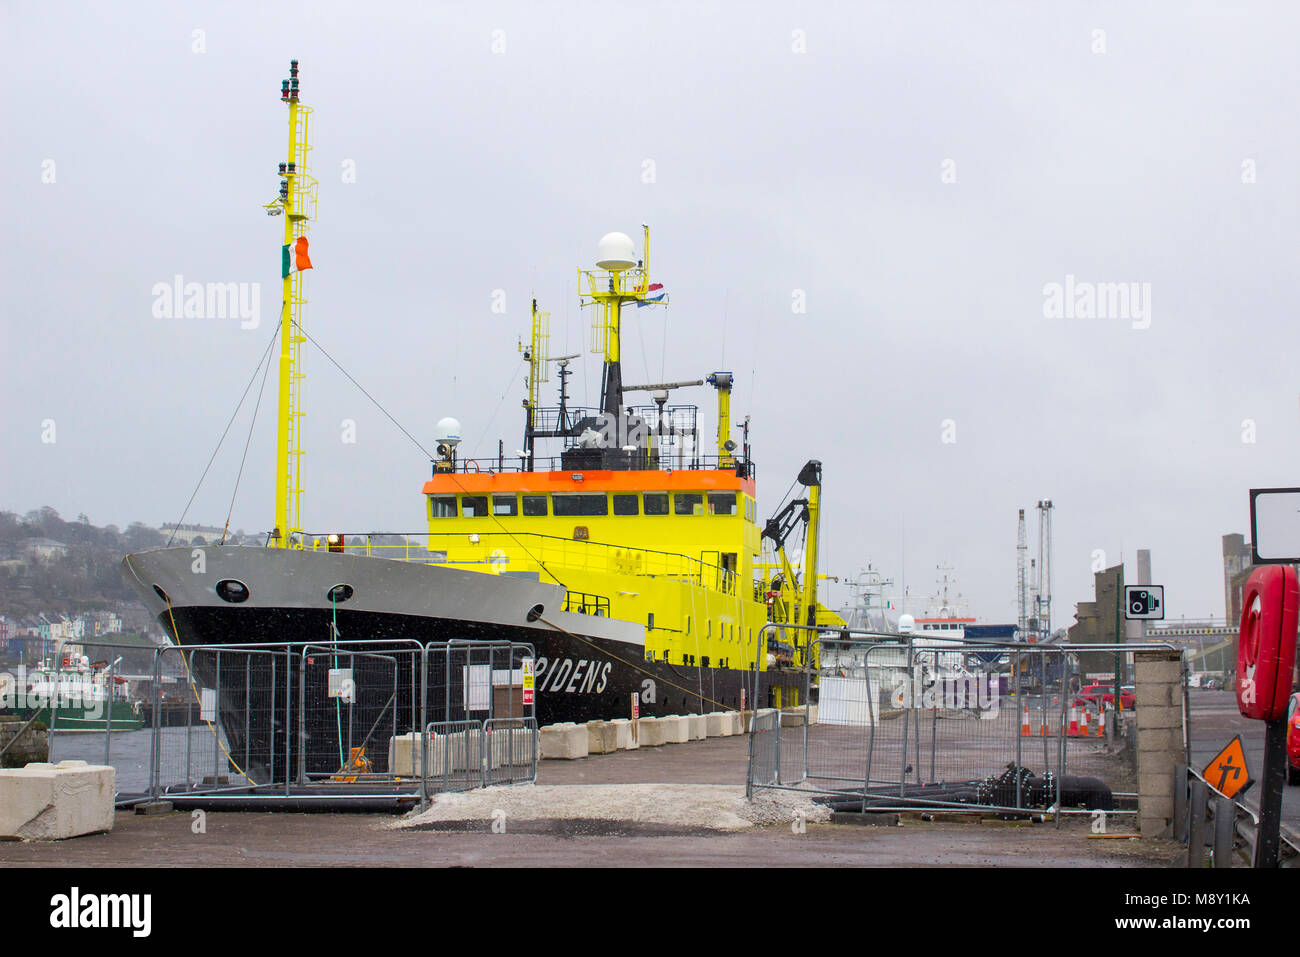 18 March 2018 The Dutch fisheries research vessel Tridens berthed at Kennedy Wharf in the city of Cork Harbour Ireland during a snow storm Stock Photo